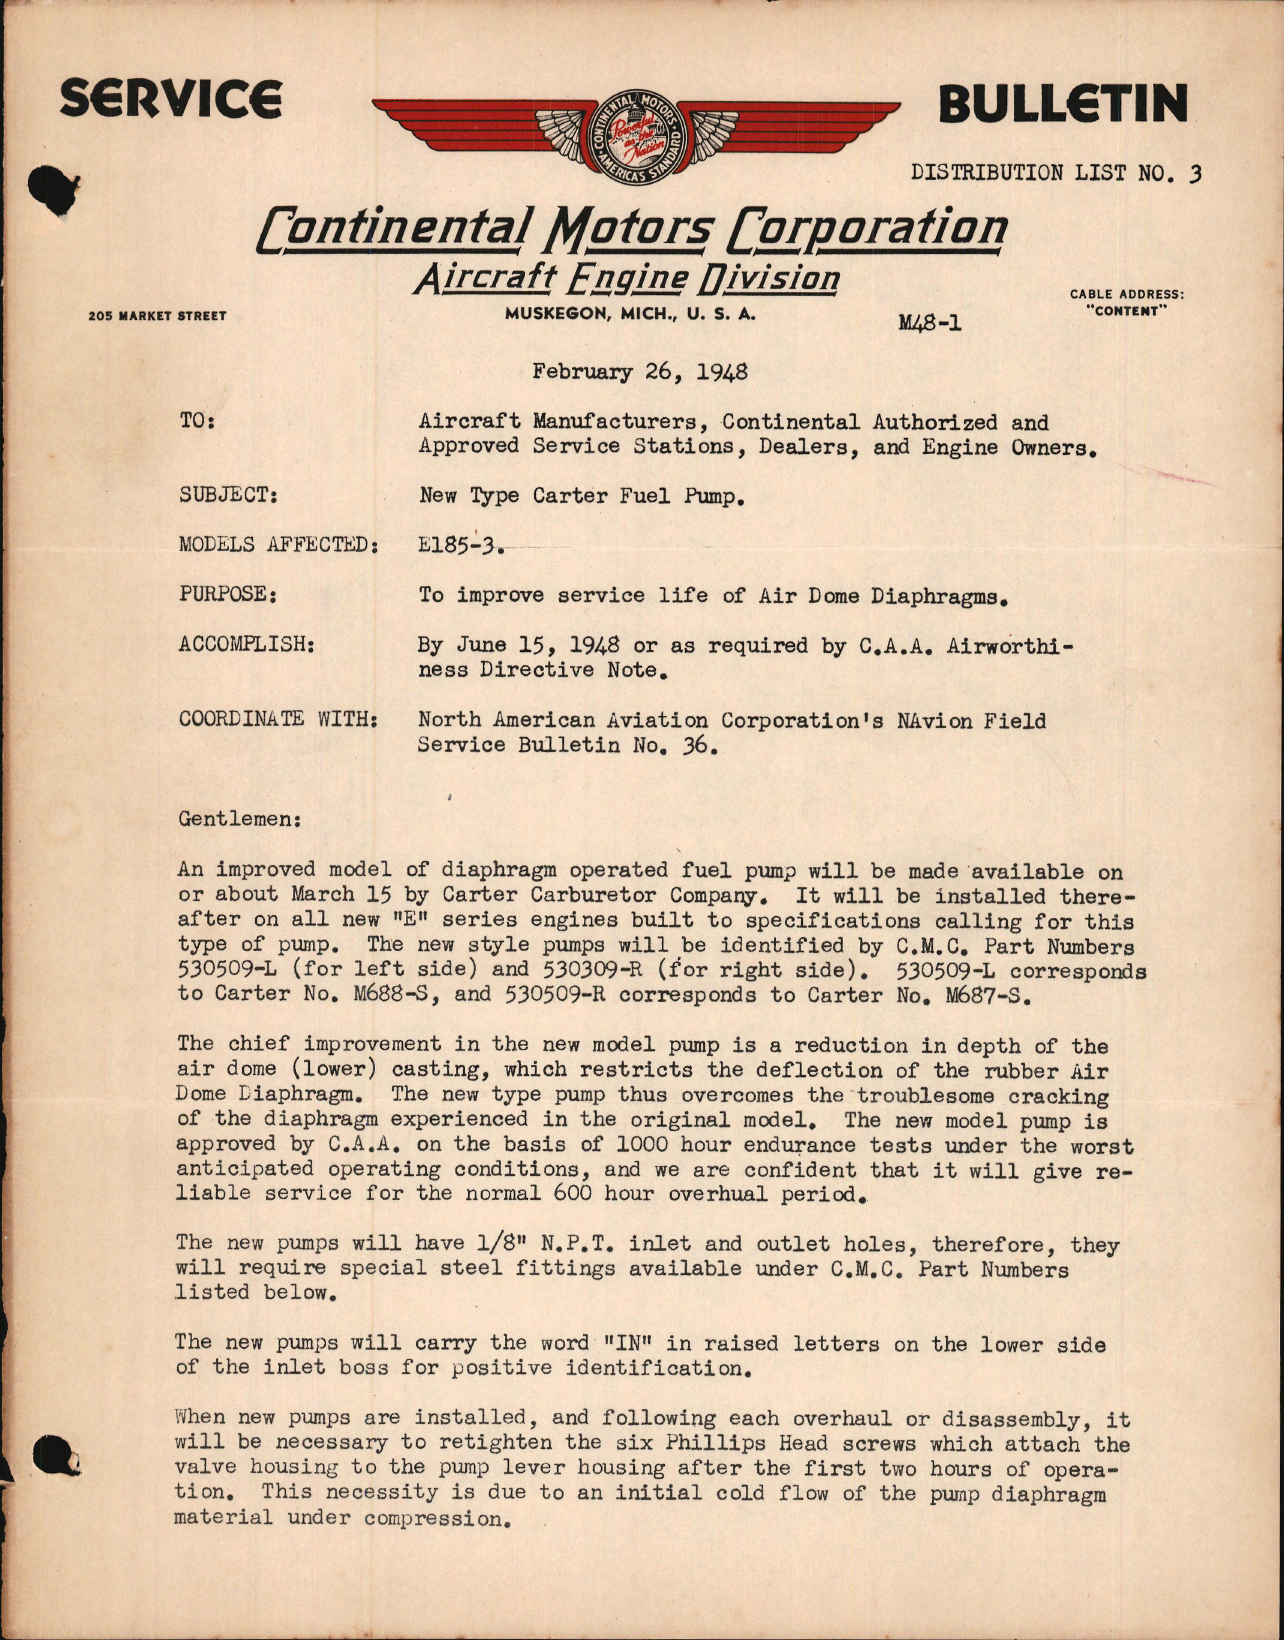 Sample page 1 from AirCorps Library document: New Type Carter Fuel Pump